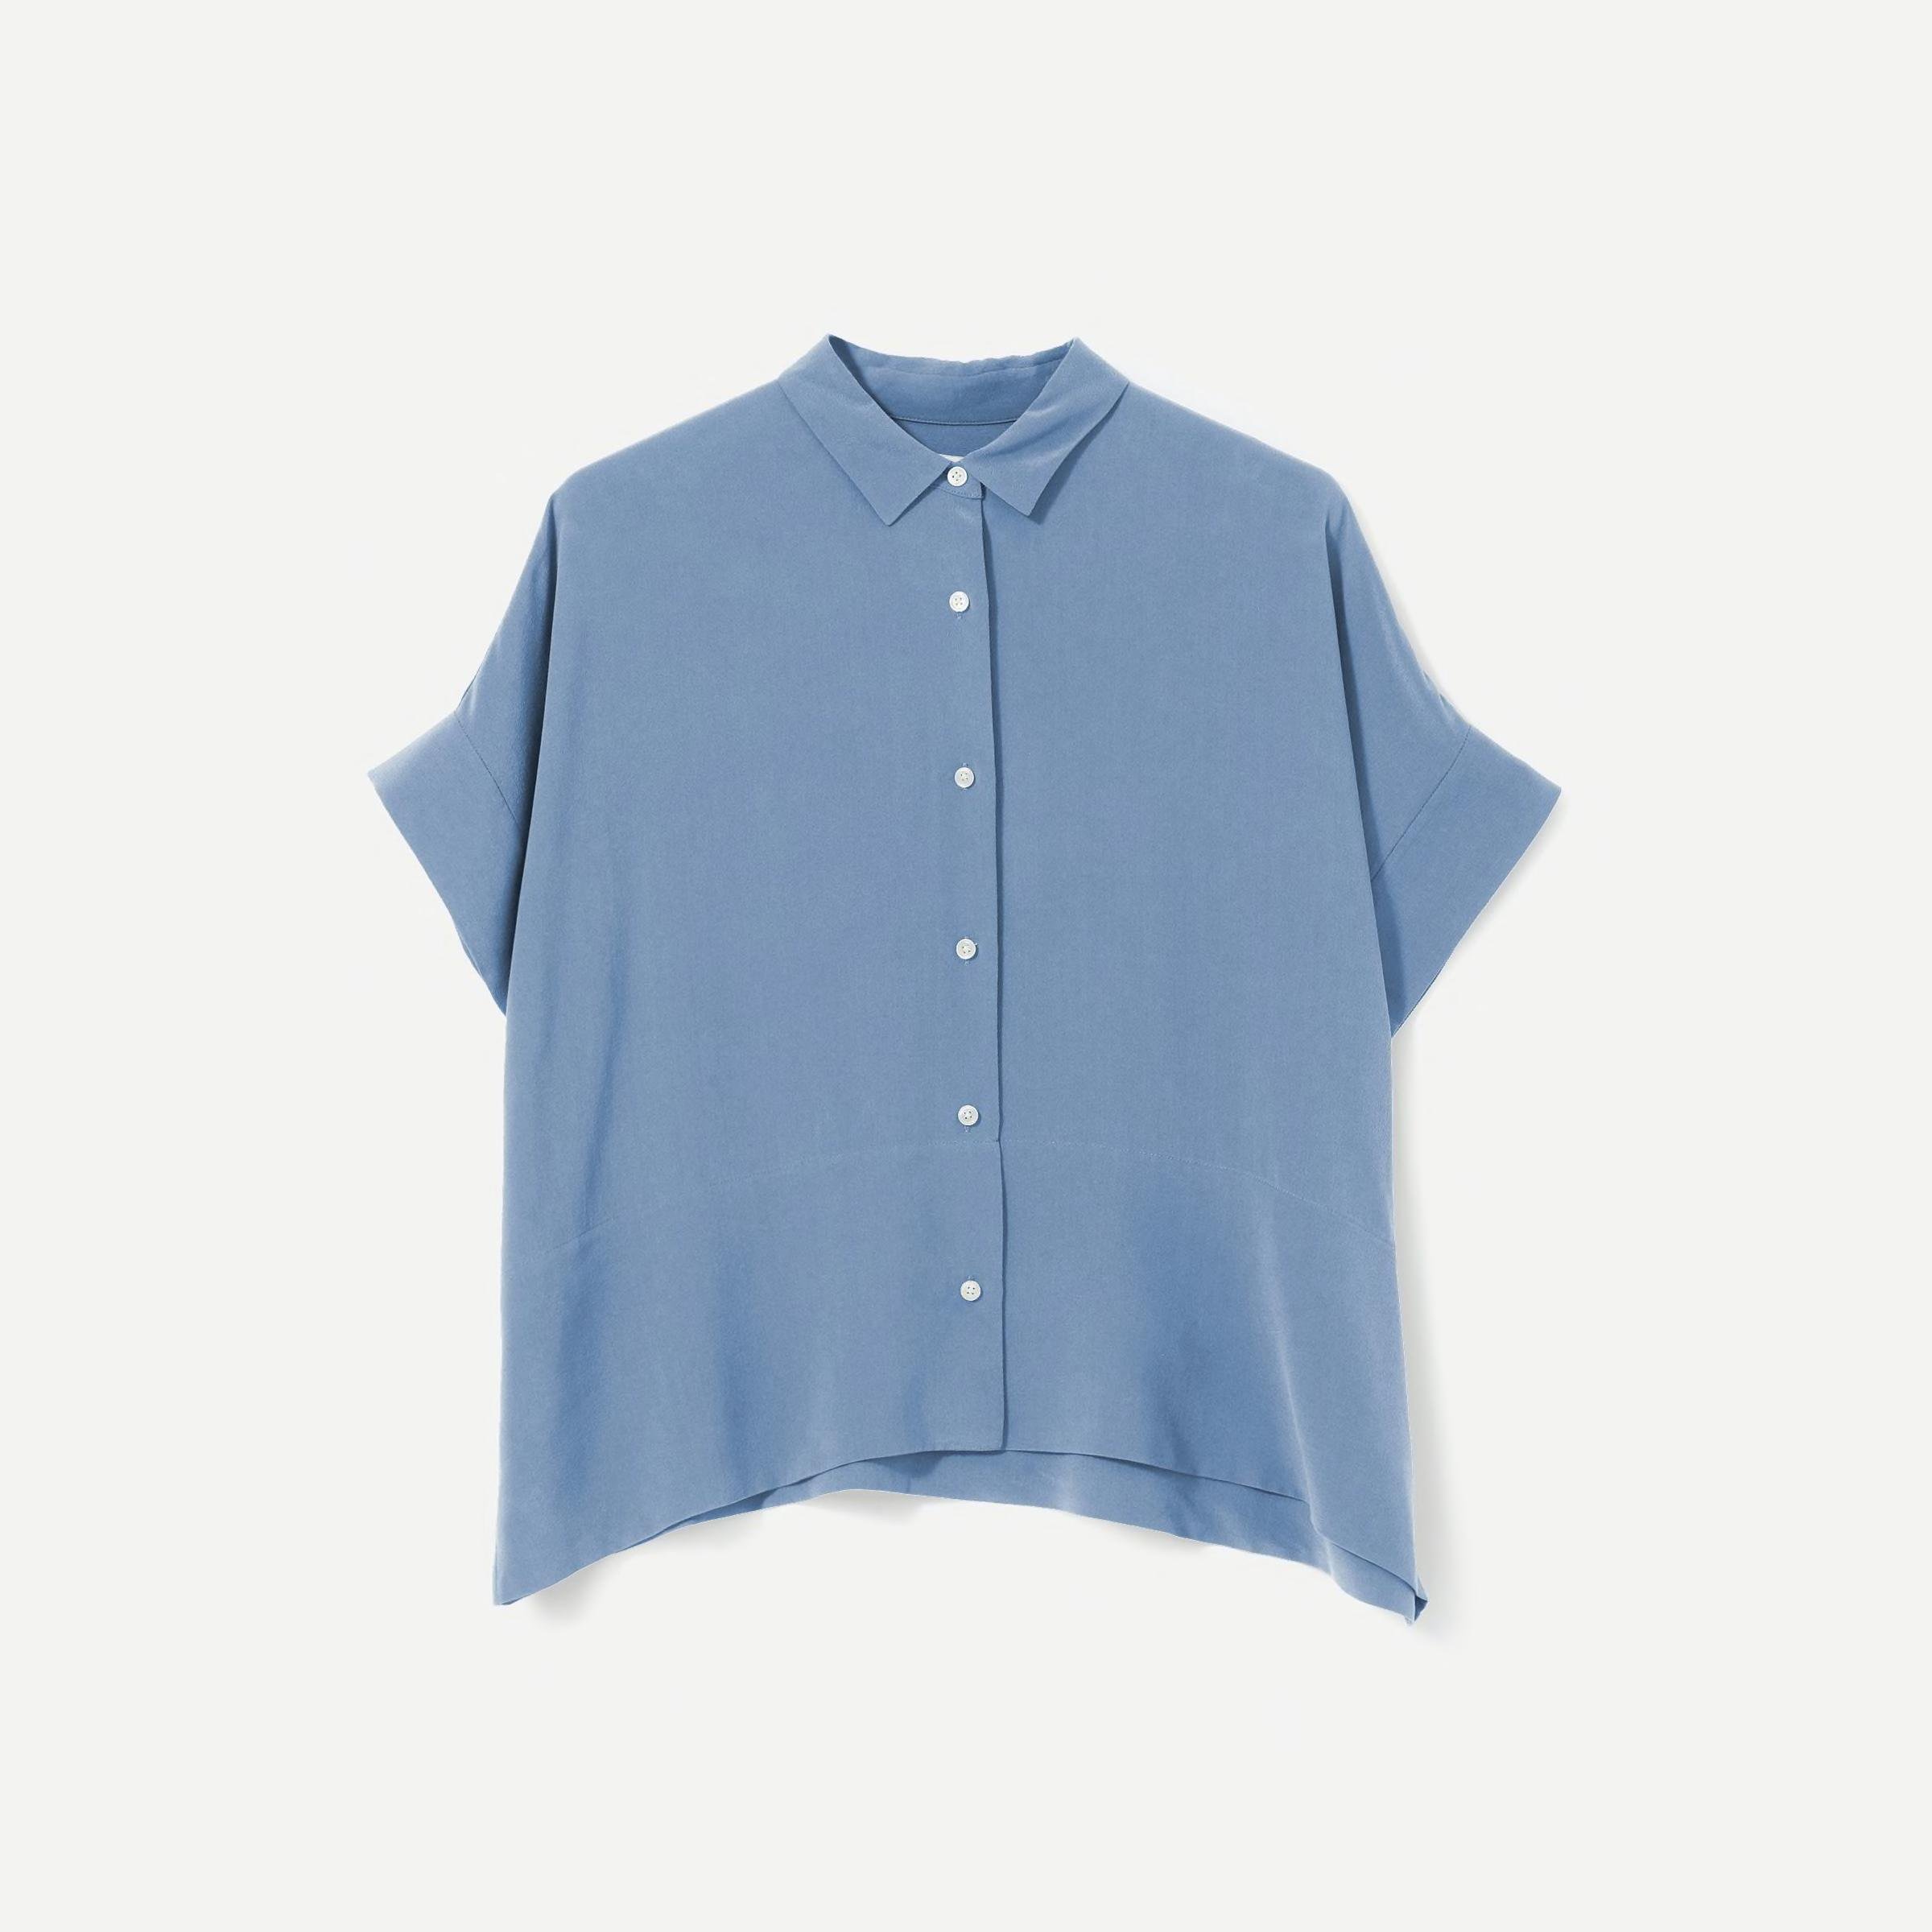 The Washable Clean Silk Short-Sleeve Square Shirt by EVERLANE